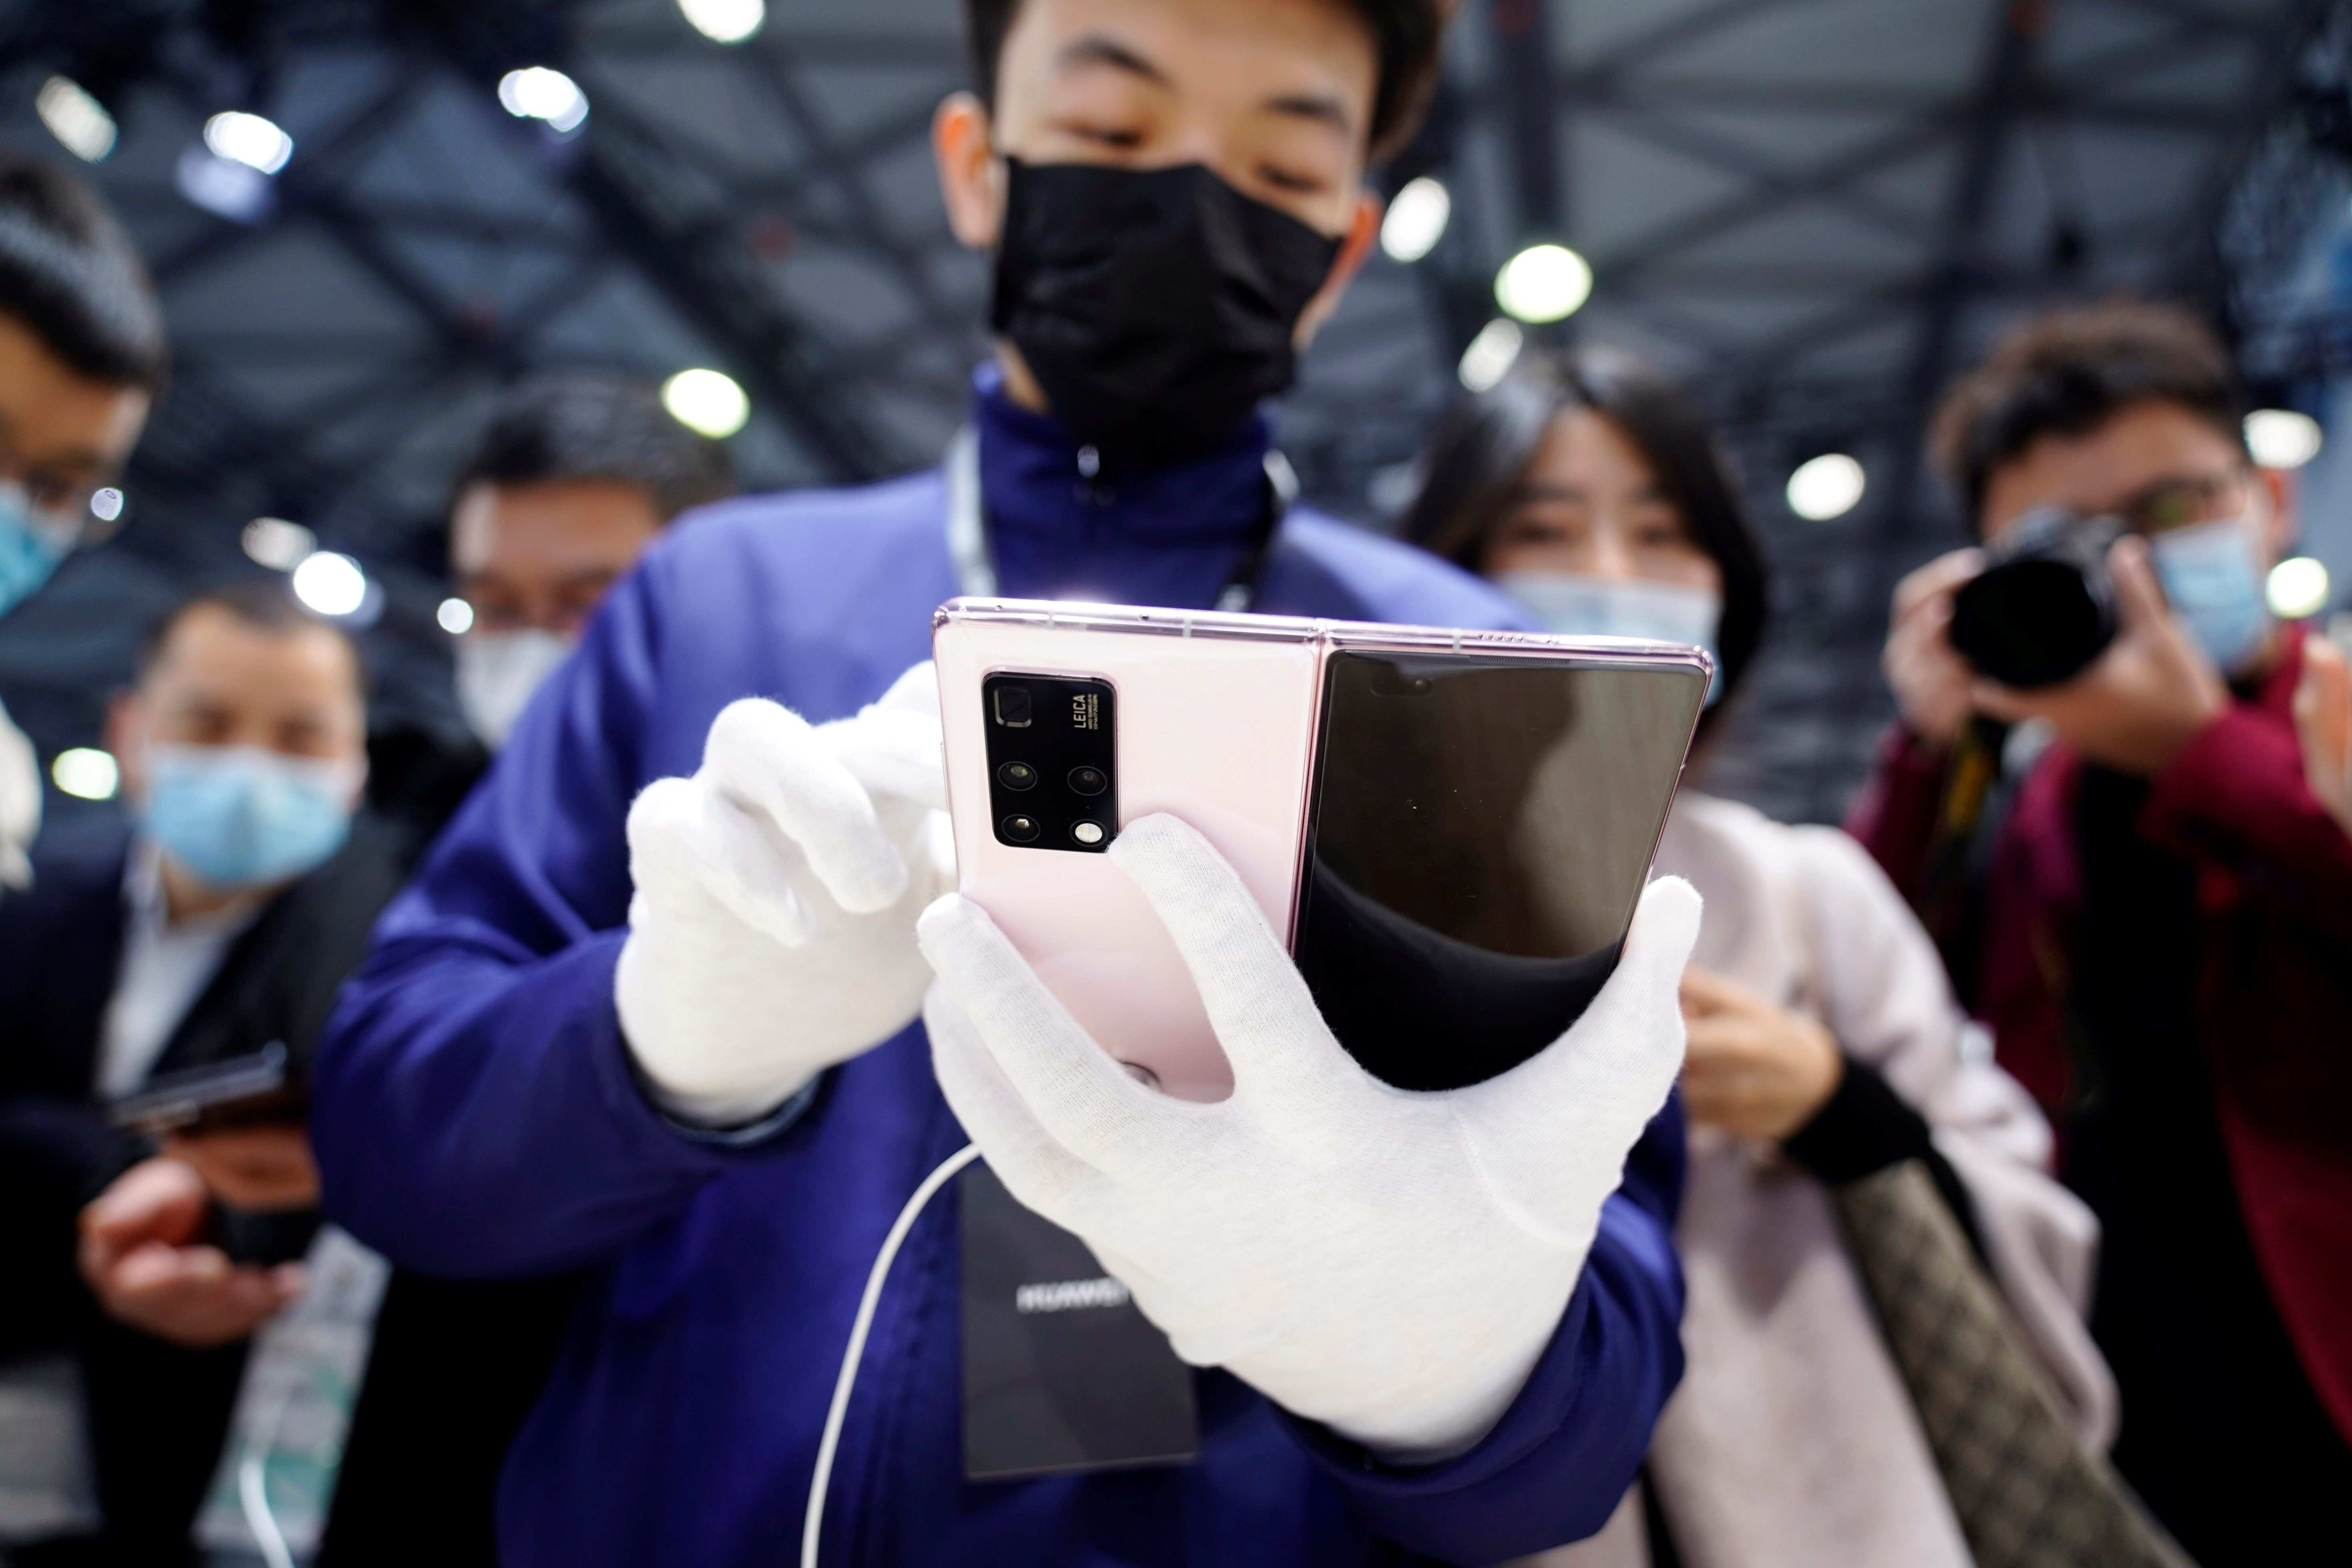 A staff member demonstrates Huawei’s new 5G Mate X2 foldable phone at the Mobile World Congress in Shanghai on February 23. Despite the US sanctions on Huawei, China will add 1 million 5G base stations this year. Photo: Reuters